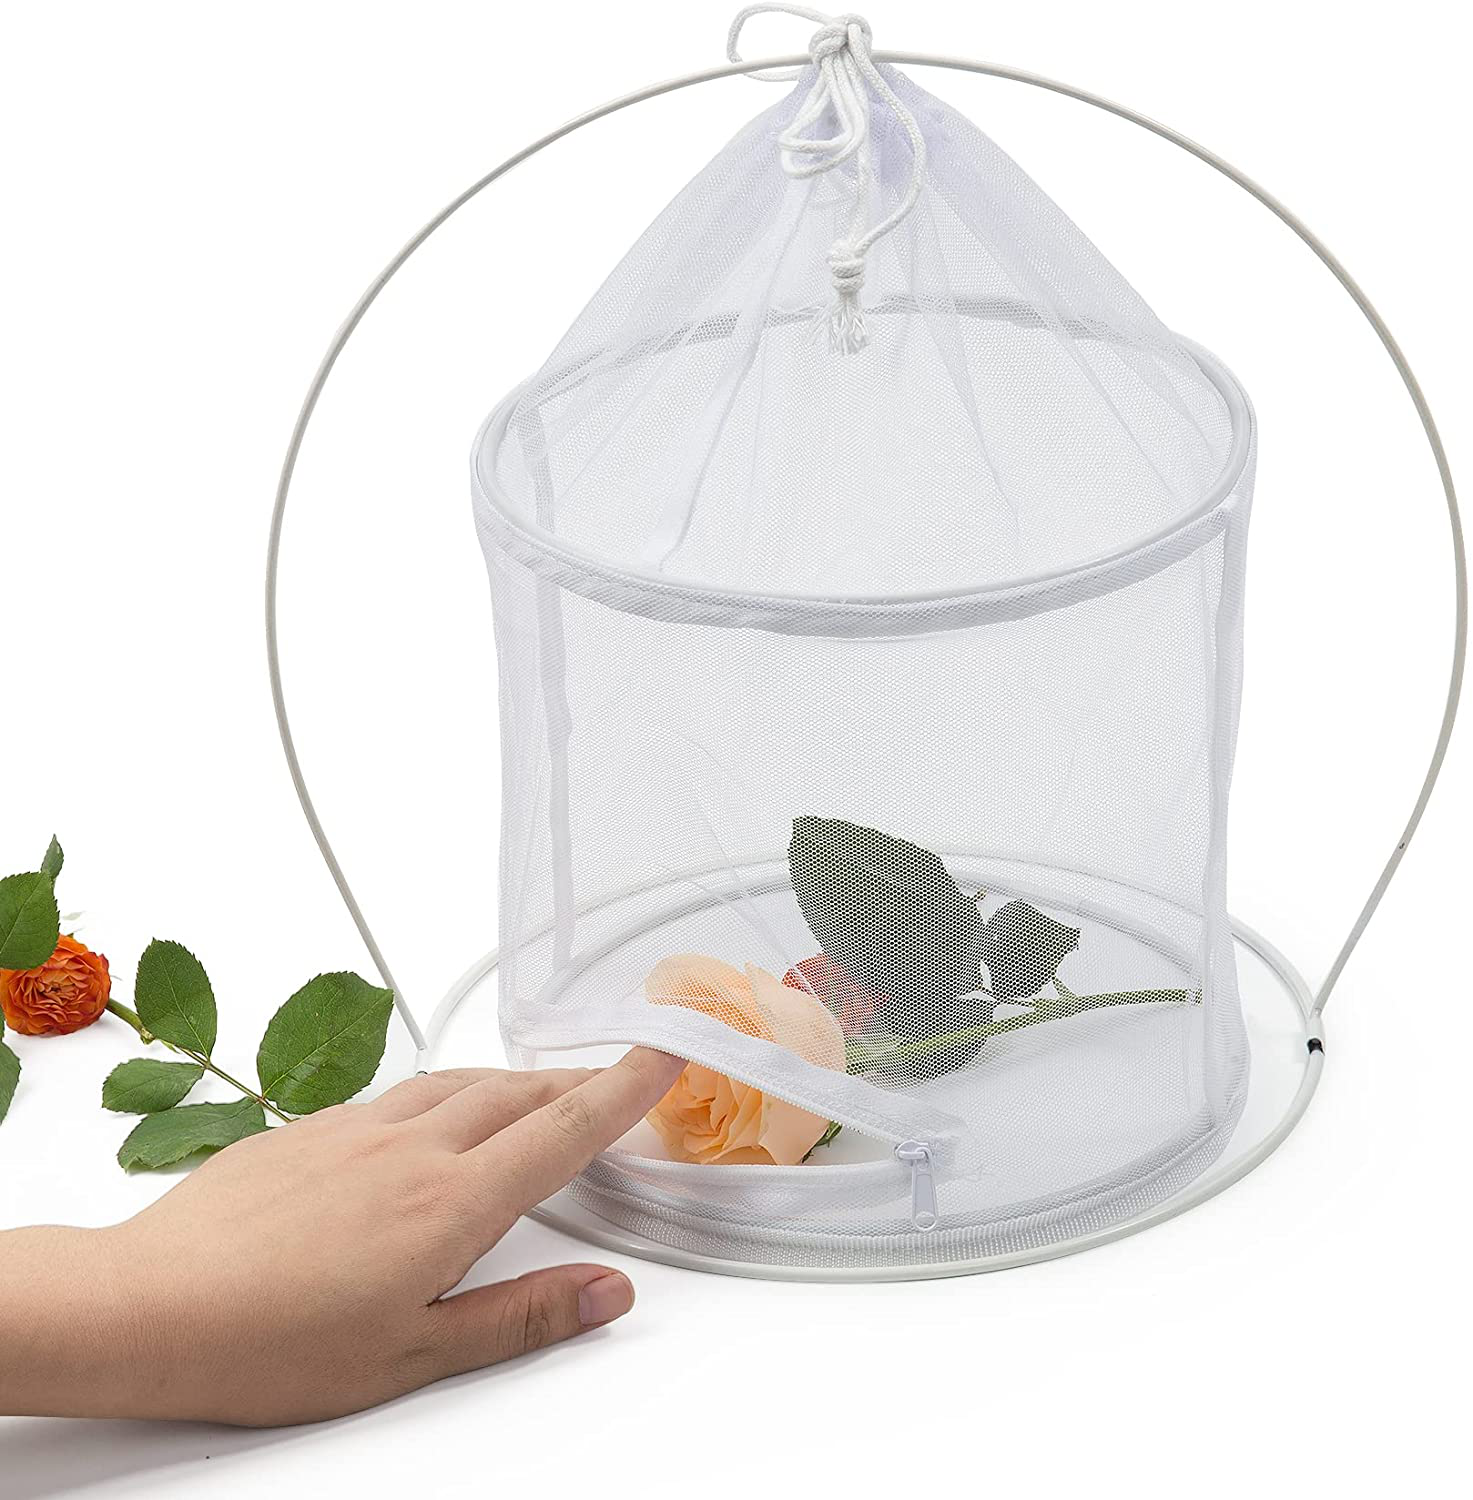 Cute Butterfly Habitat, Insect Mesh Cage, Caterpillar Enclosure, Critter Cage, Bug Terrarium 9.8 X 12 Inches